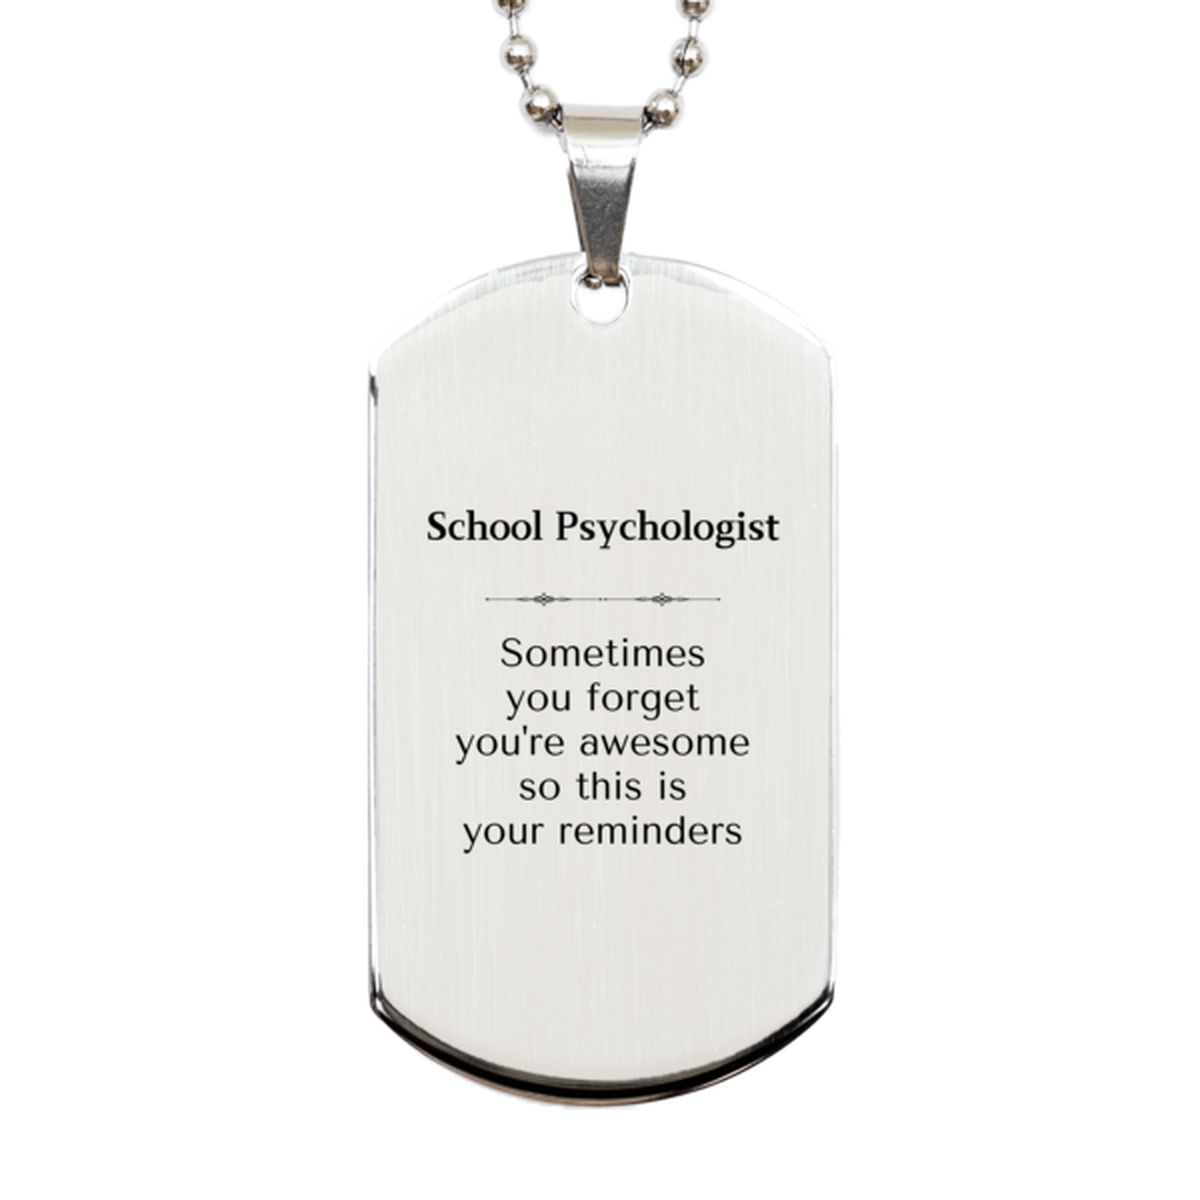 Sentimental School Psychologist Silver Dog Tag, School Psychologist Sometimes you forget you're awesome so this is your reminders, Graduation Christmas Birthday Gifts for School Psychologist, Men, Women, Coworkers